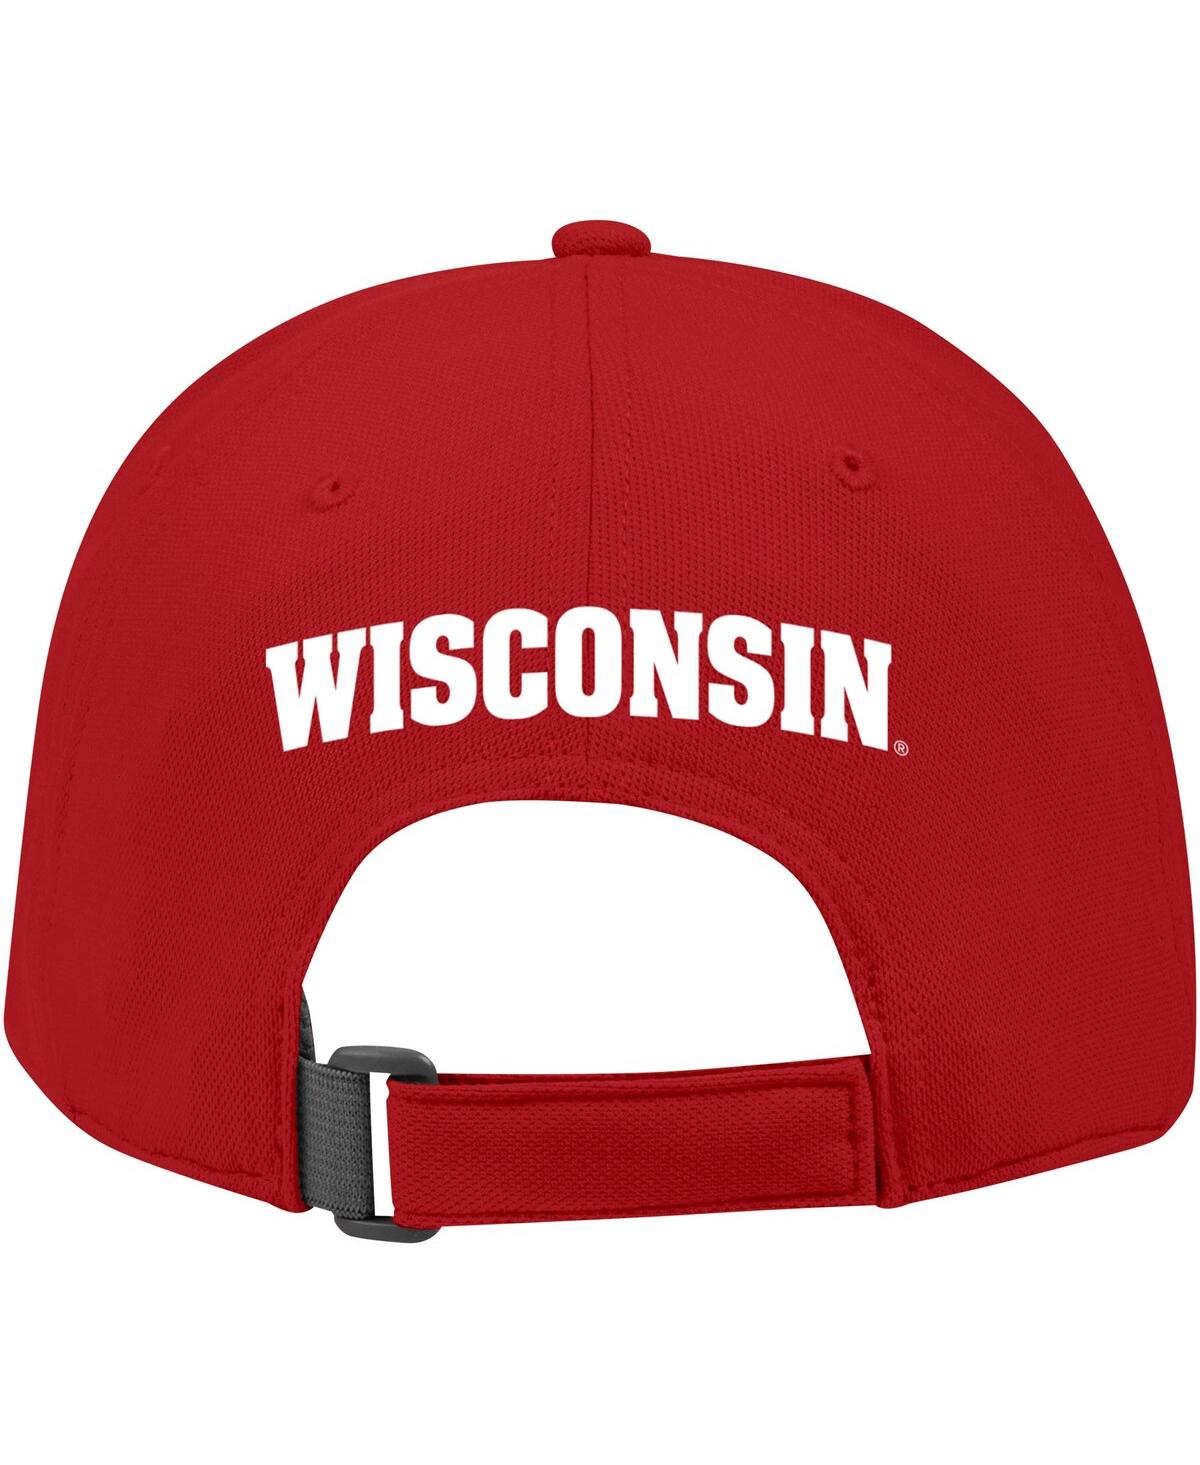 Shop Under Armour Youth Boys And Girls  Red Wisconsin Badgers Blitzing Accent Performance Adjustable Hat